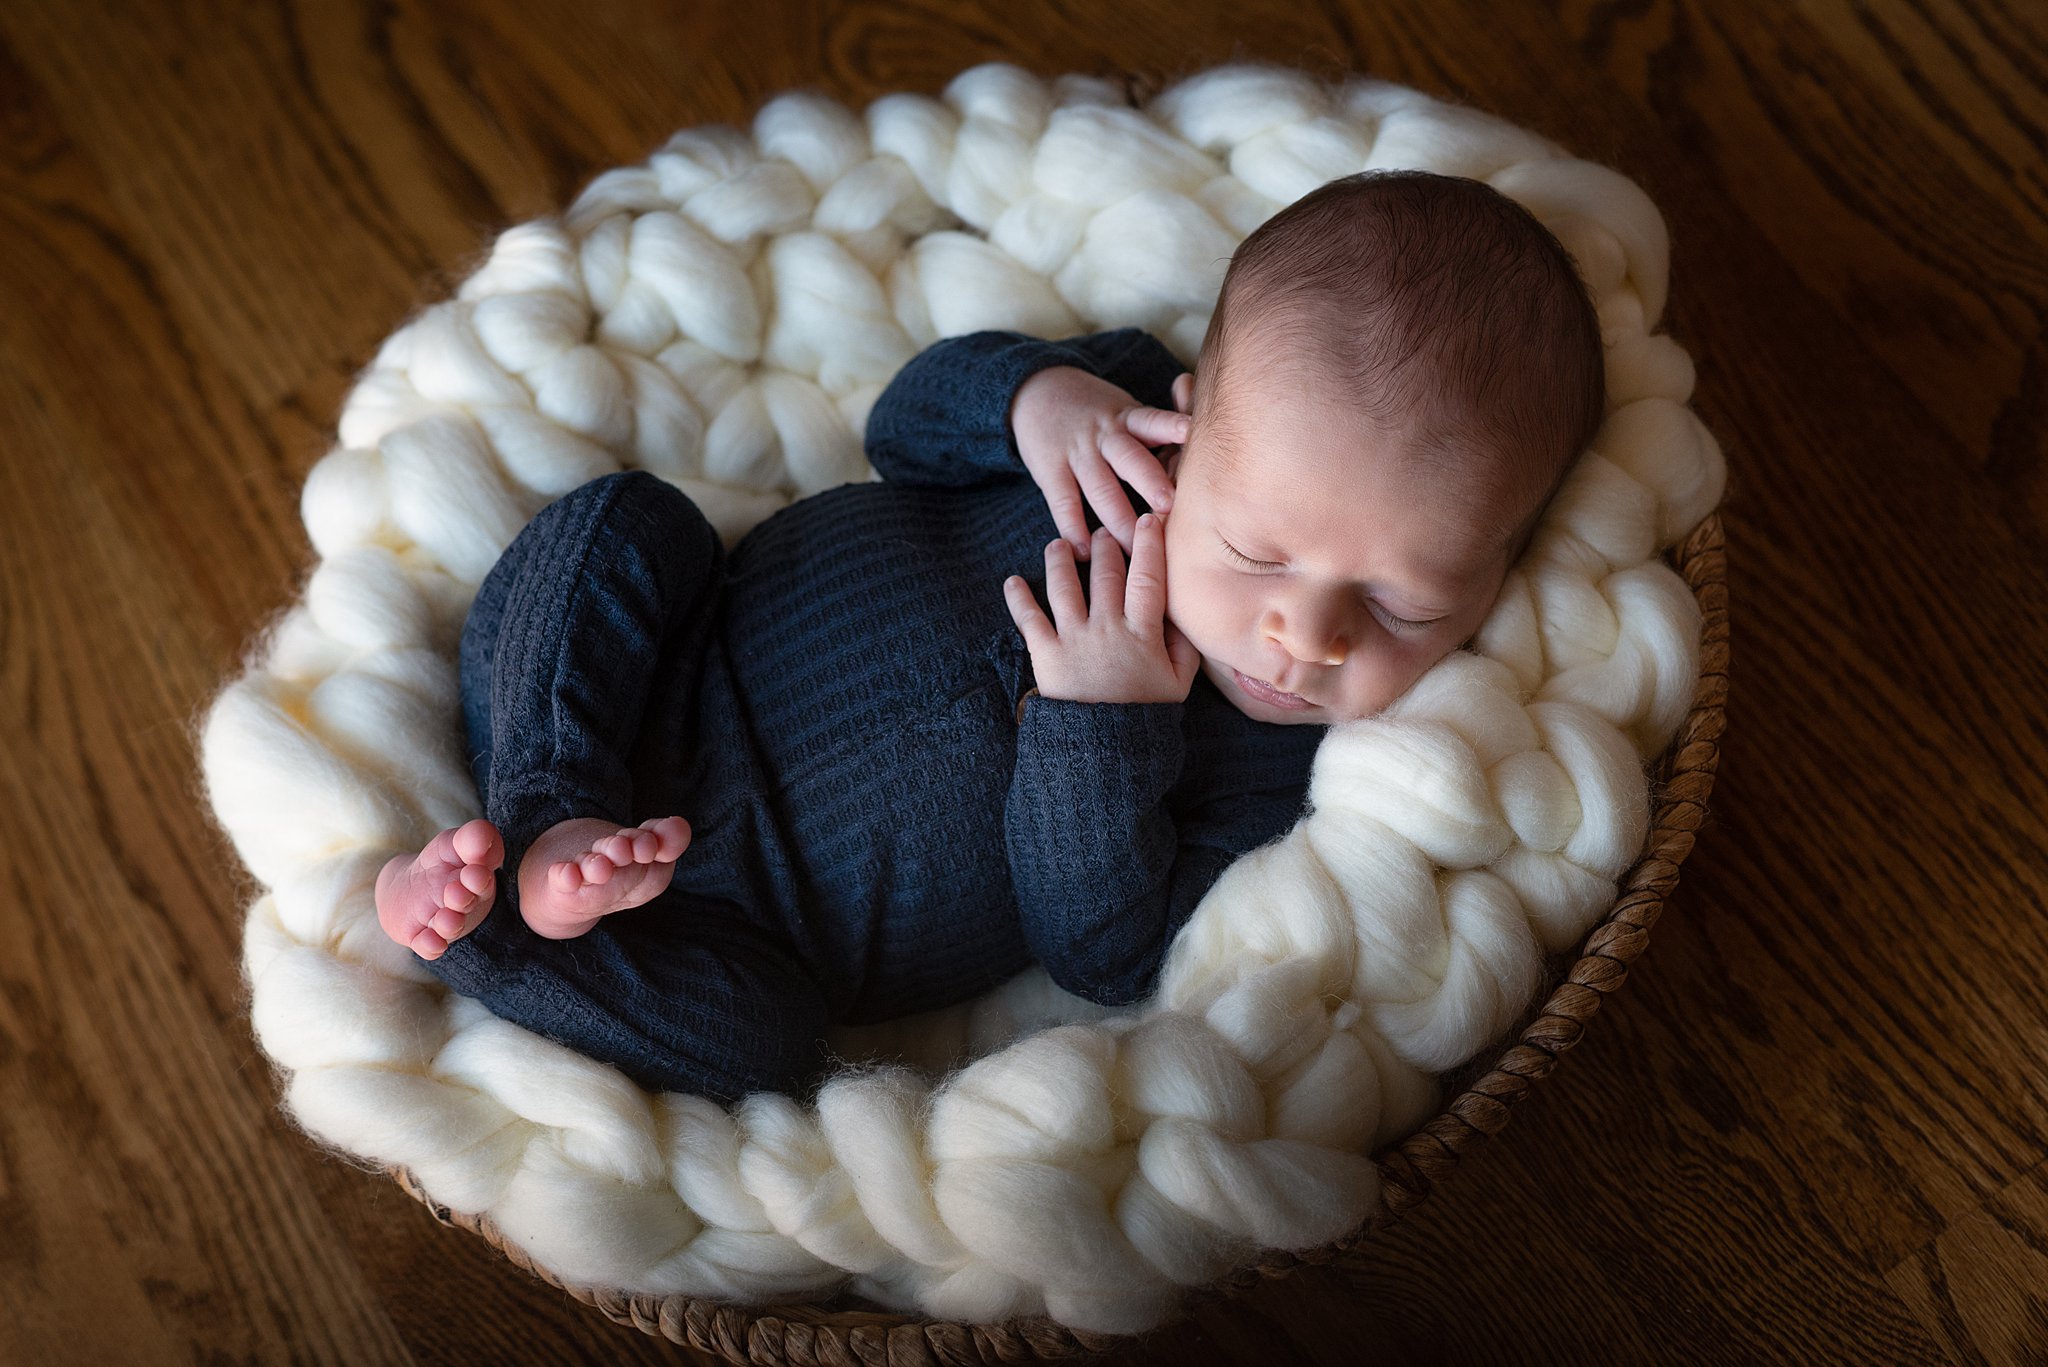 A newborn baby in a blue onesie sleeps in a wicker basket on a wood floor thanks to Colorado Mountain Doulas